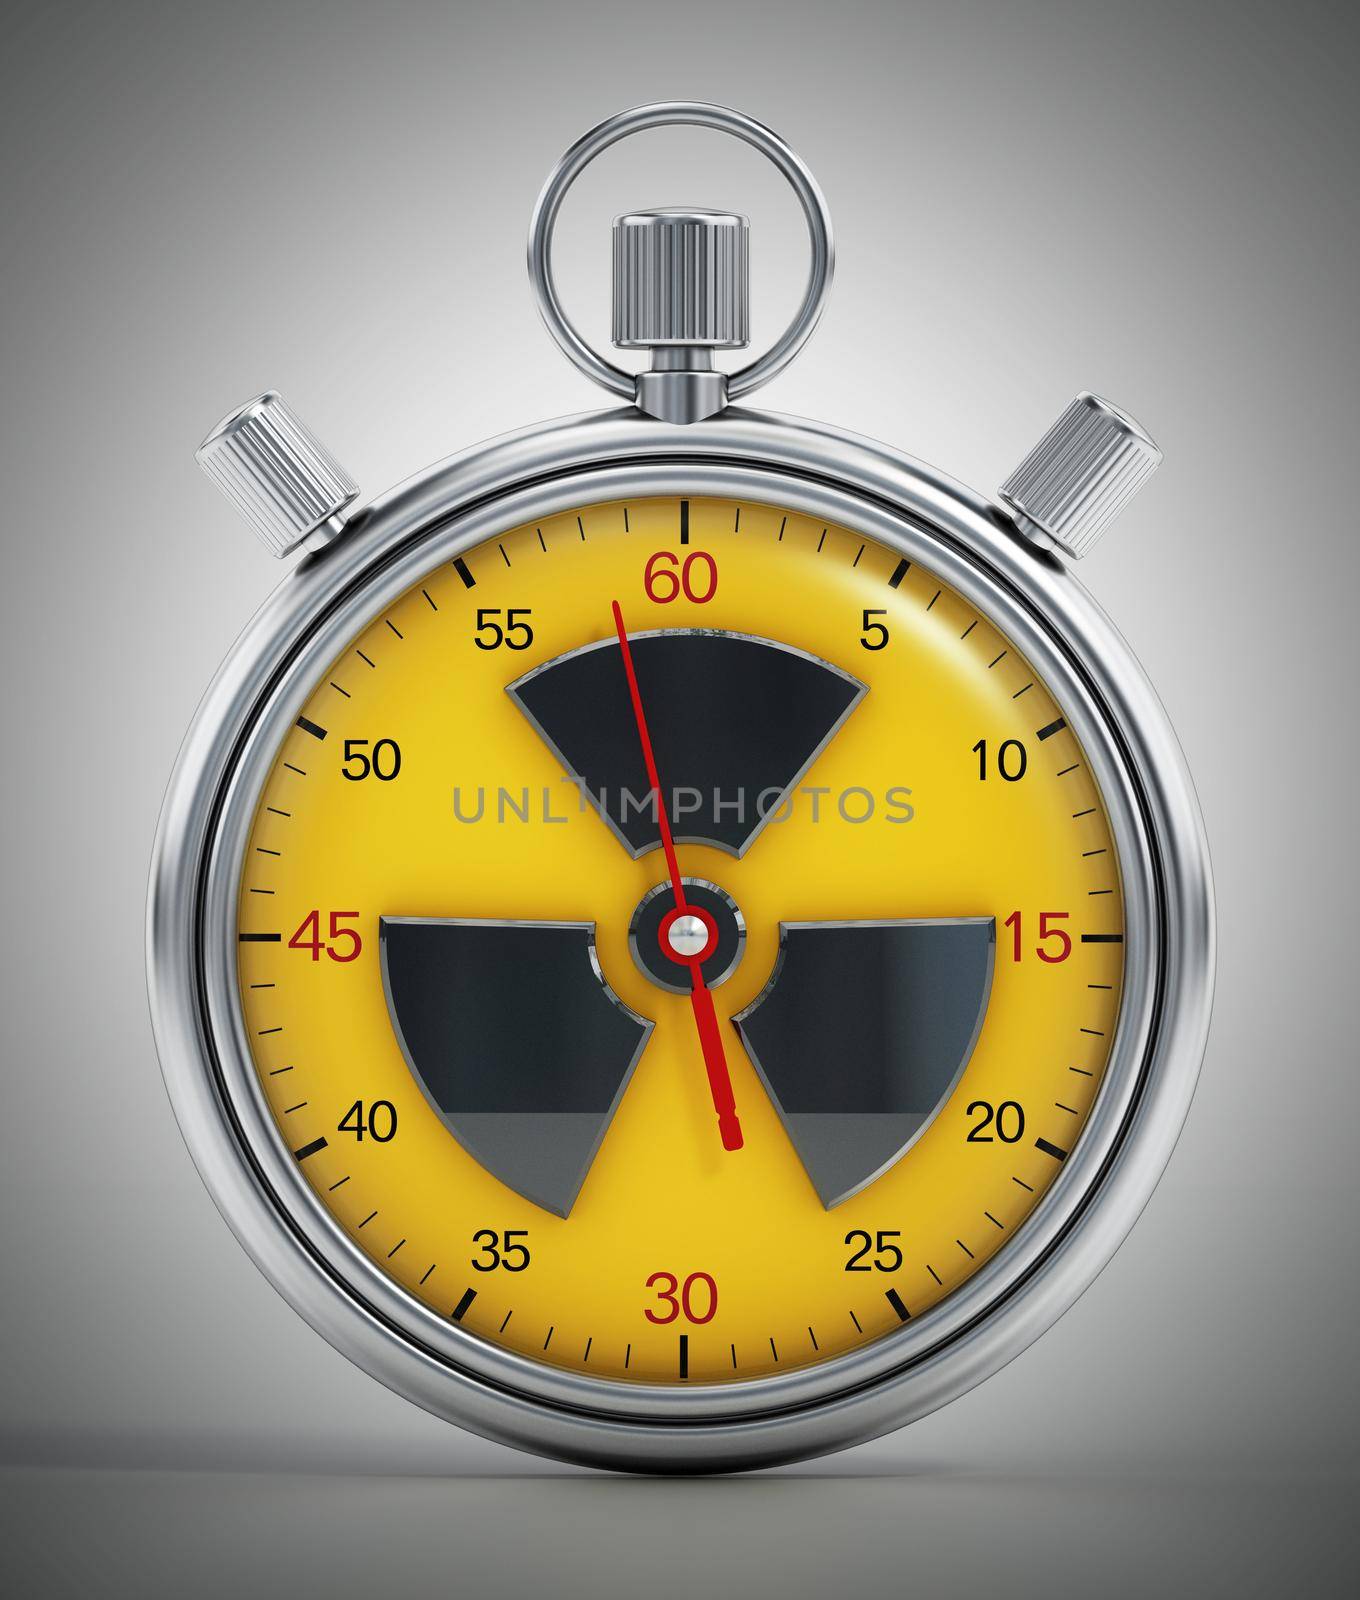 Chronometer with radiation icon. Nuclear war countdown concept. 3D illustration.